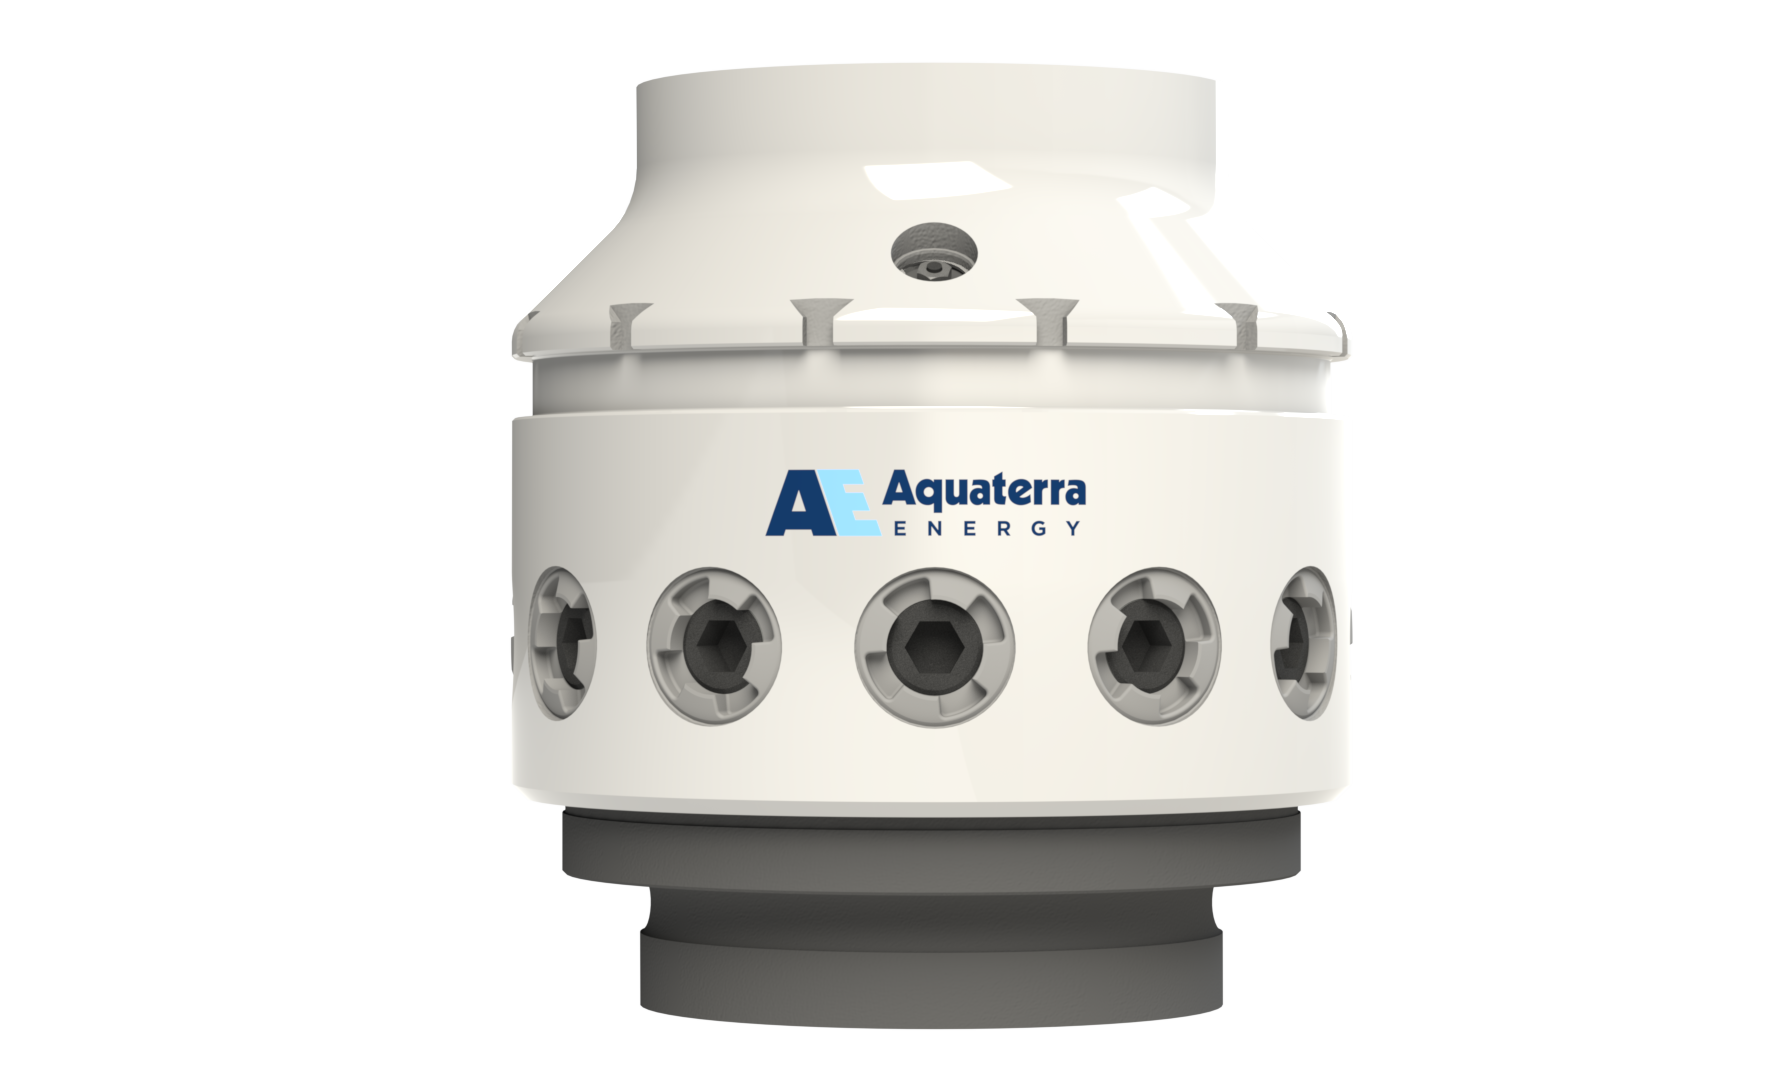 Aquaterra Energy launches new system to support CCS developments